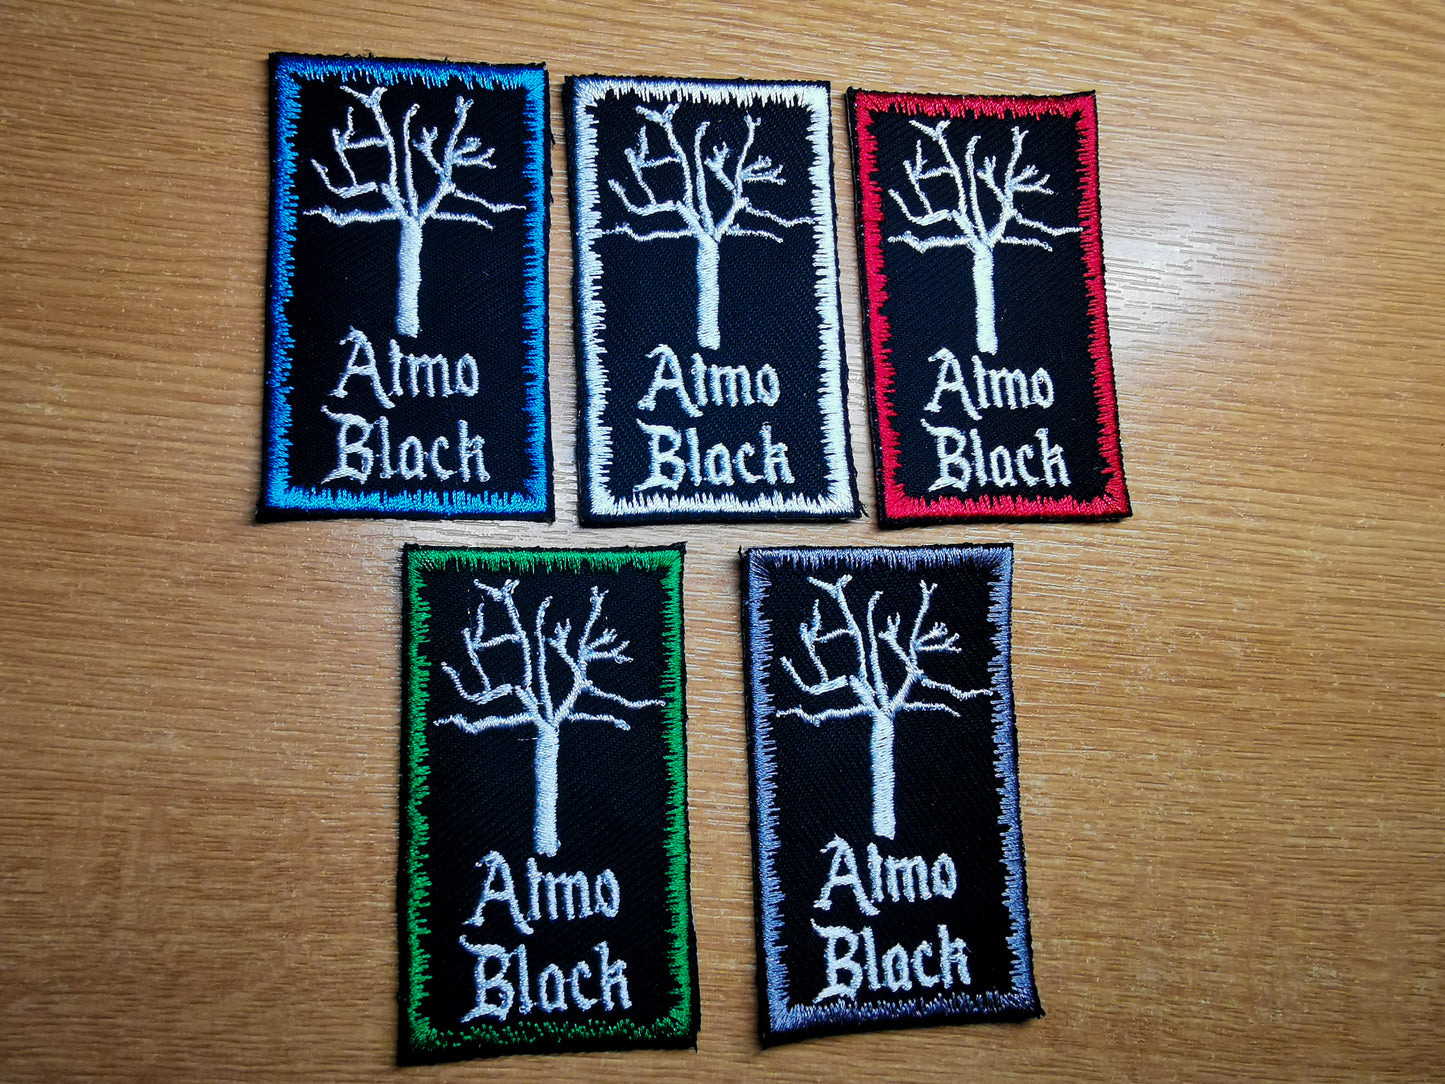 Atmospheric Black Metal Embroidered Patch Trees